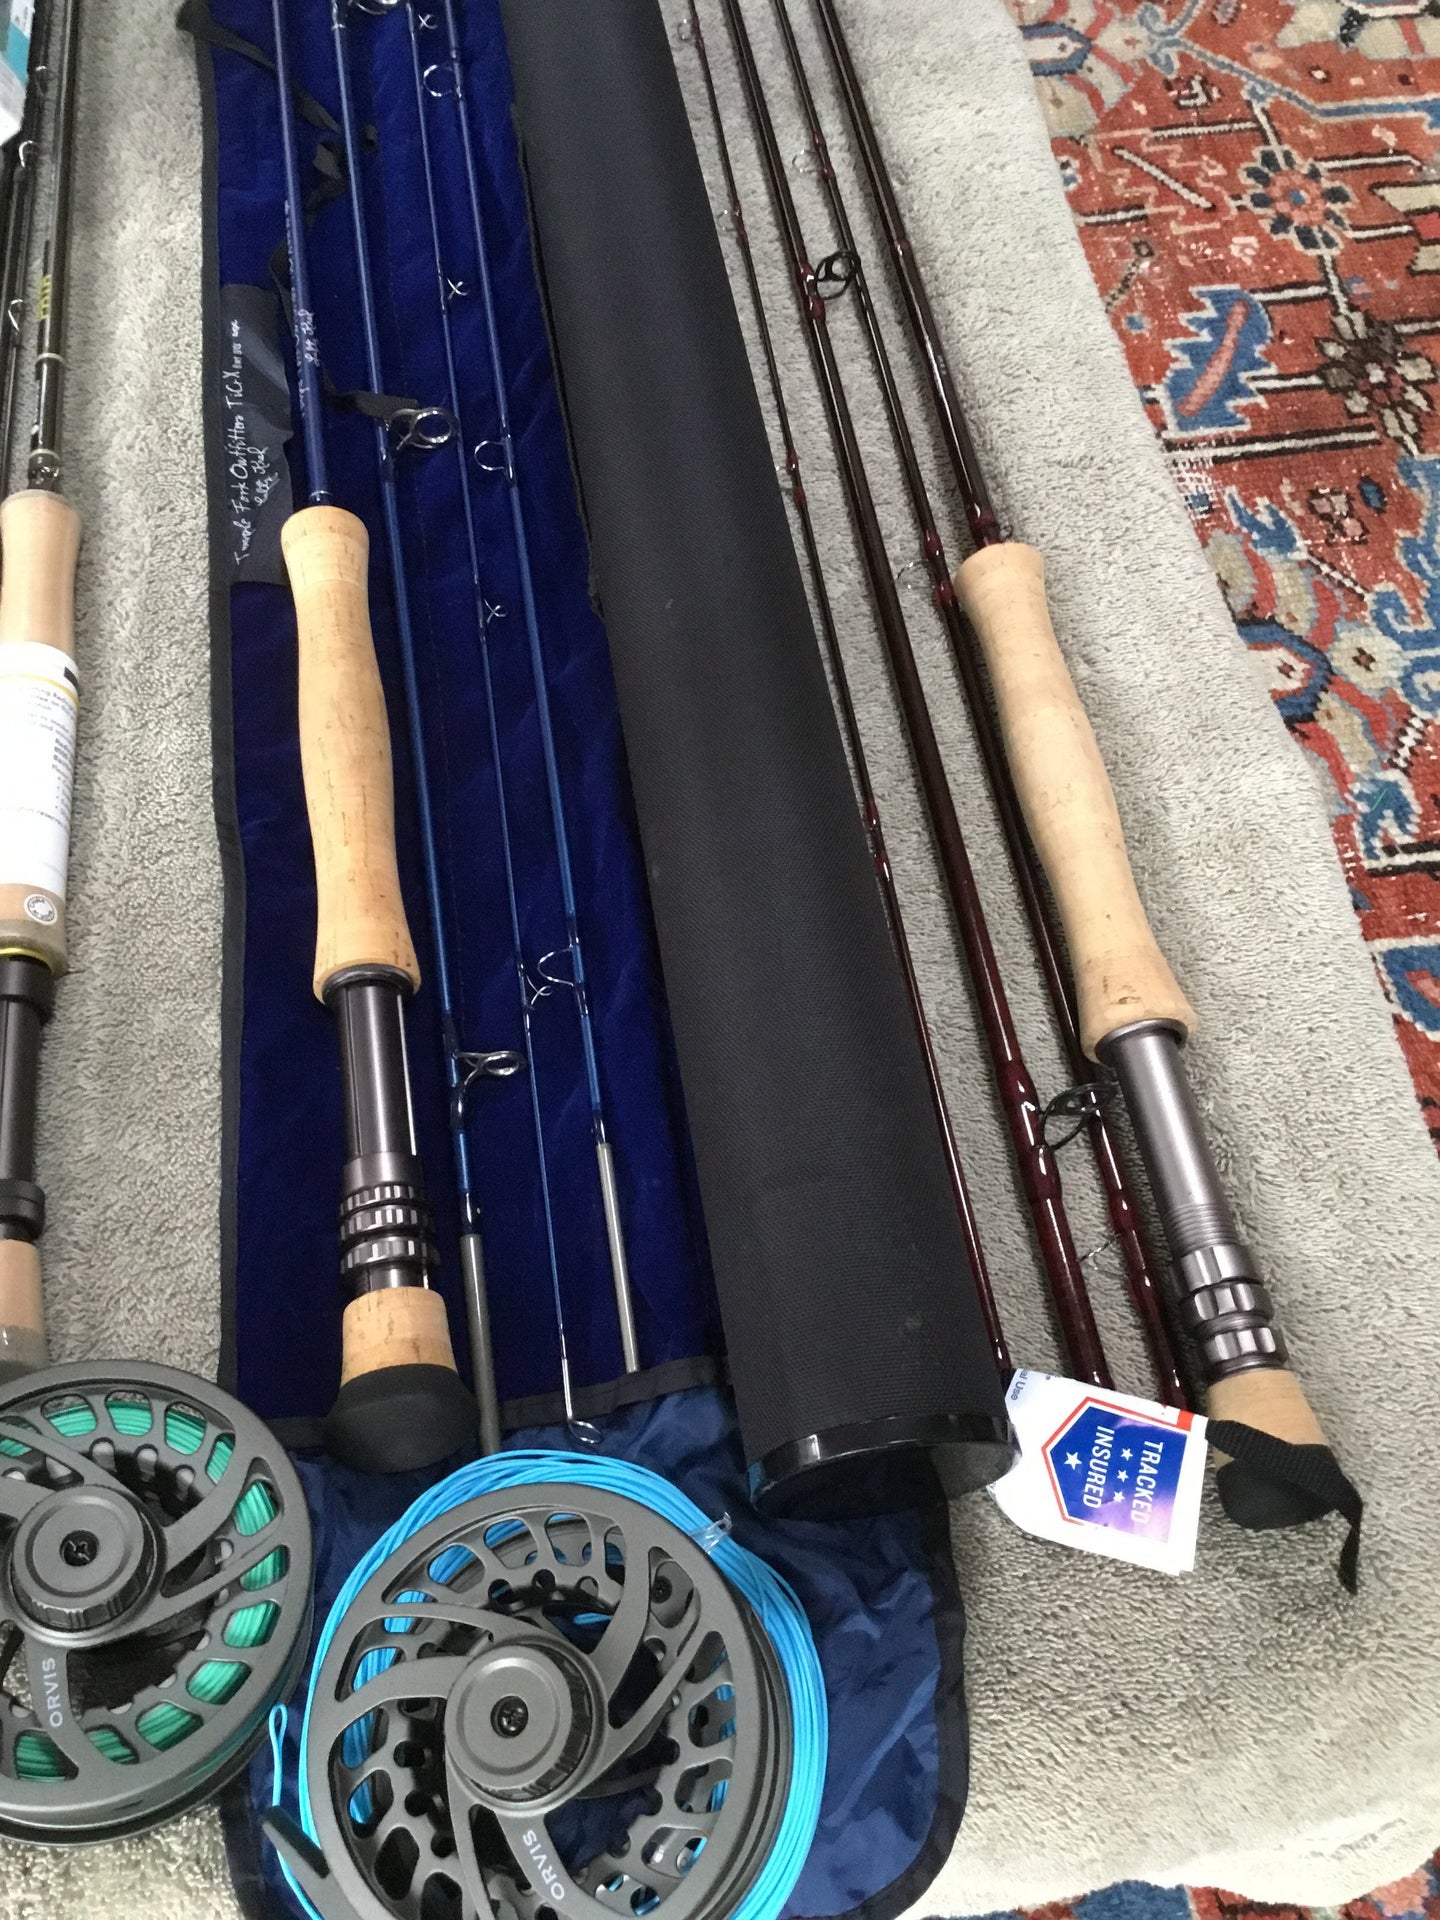 8 wt rod / reel / line combos ~ tfo,Orvis ,st croix ,Rio ~ new ~ solid  values